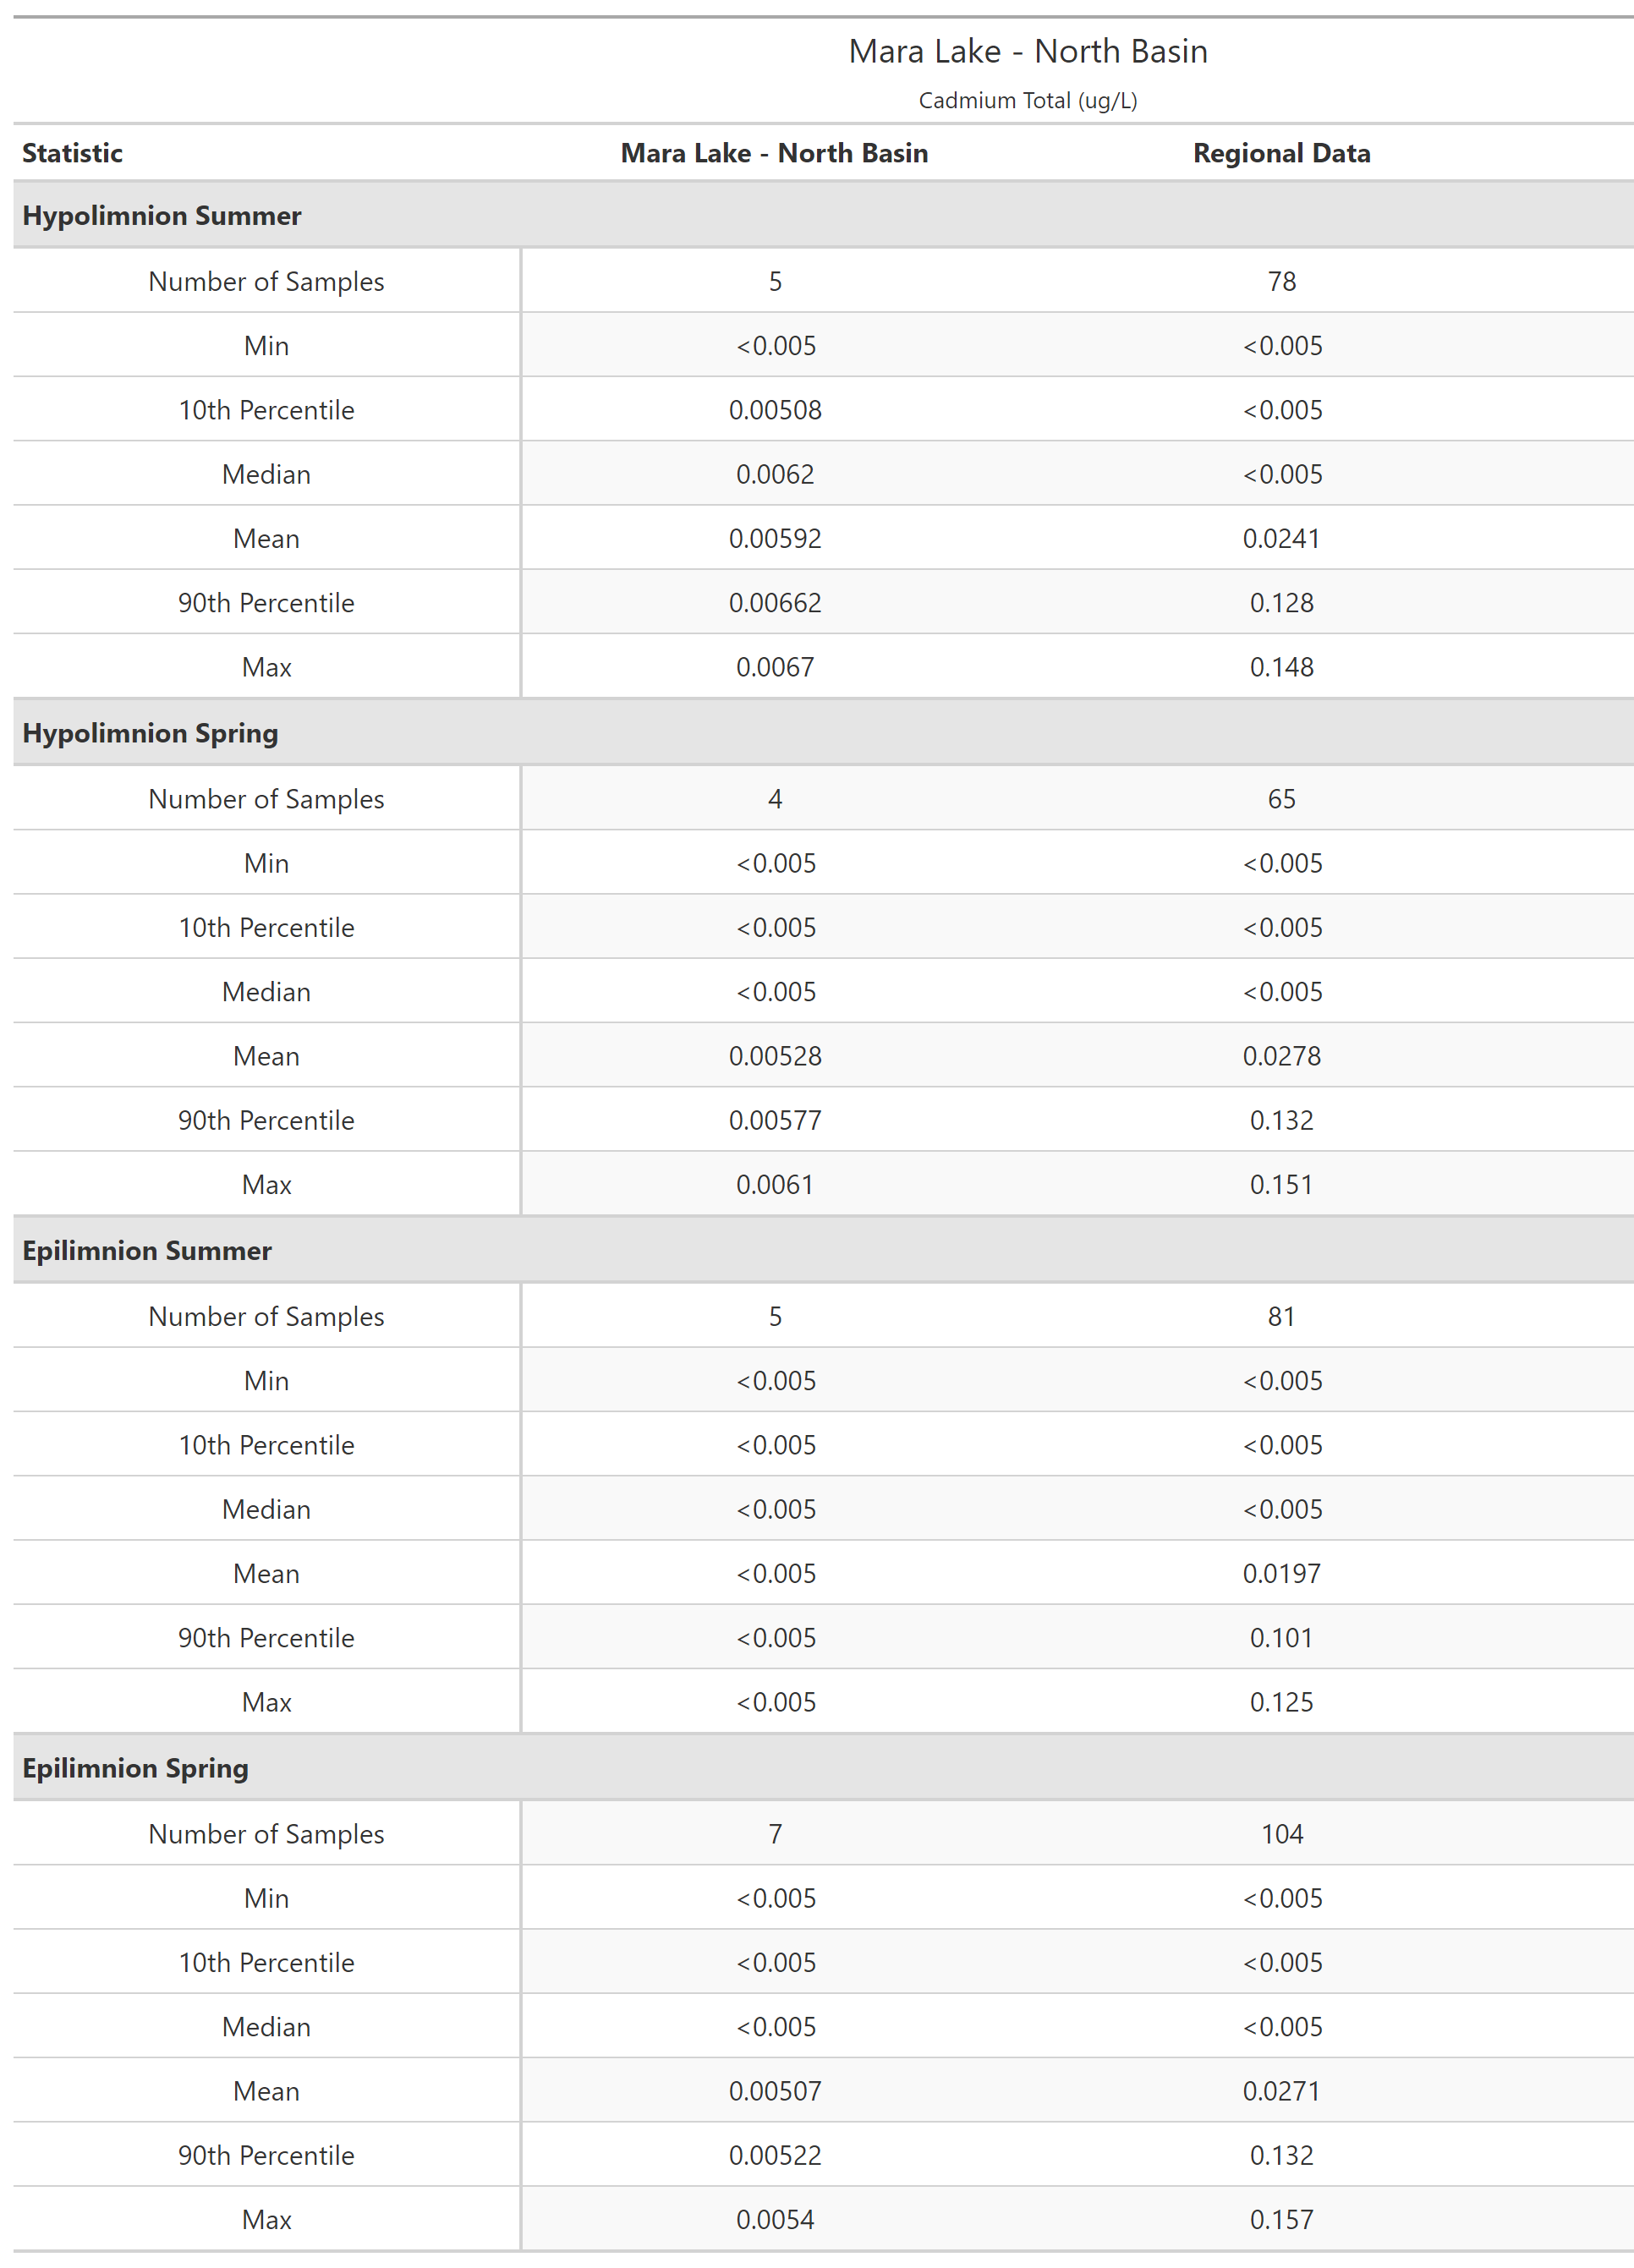 A table of summary statistics for Cadmium Total with comparison to regional data